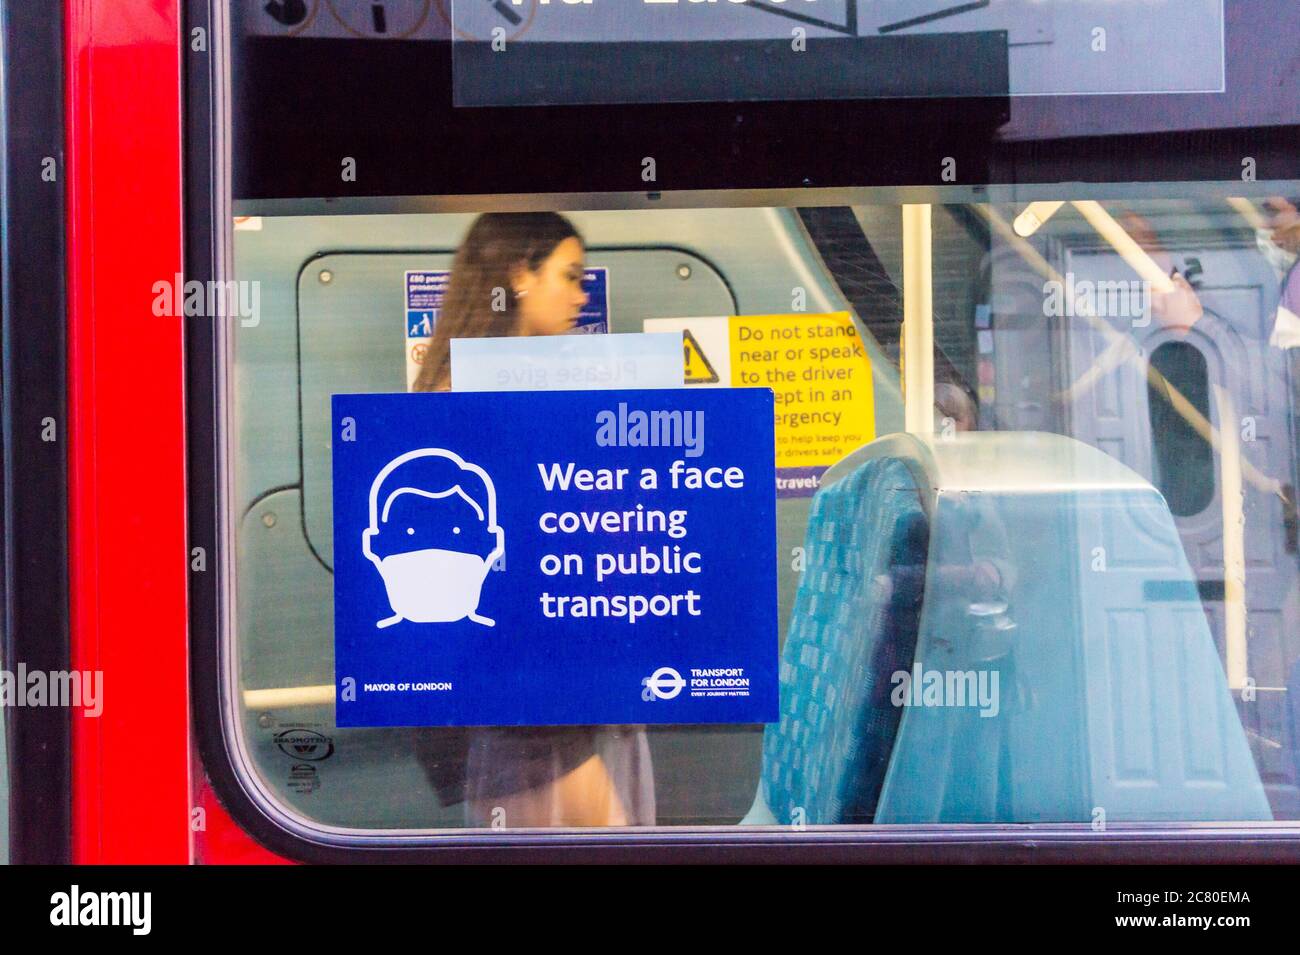 Face covering sign on a London bus with a young woman inside without a mask. Image taken before wearing a covering was required by law. Stock Photo